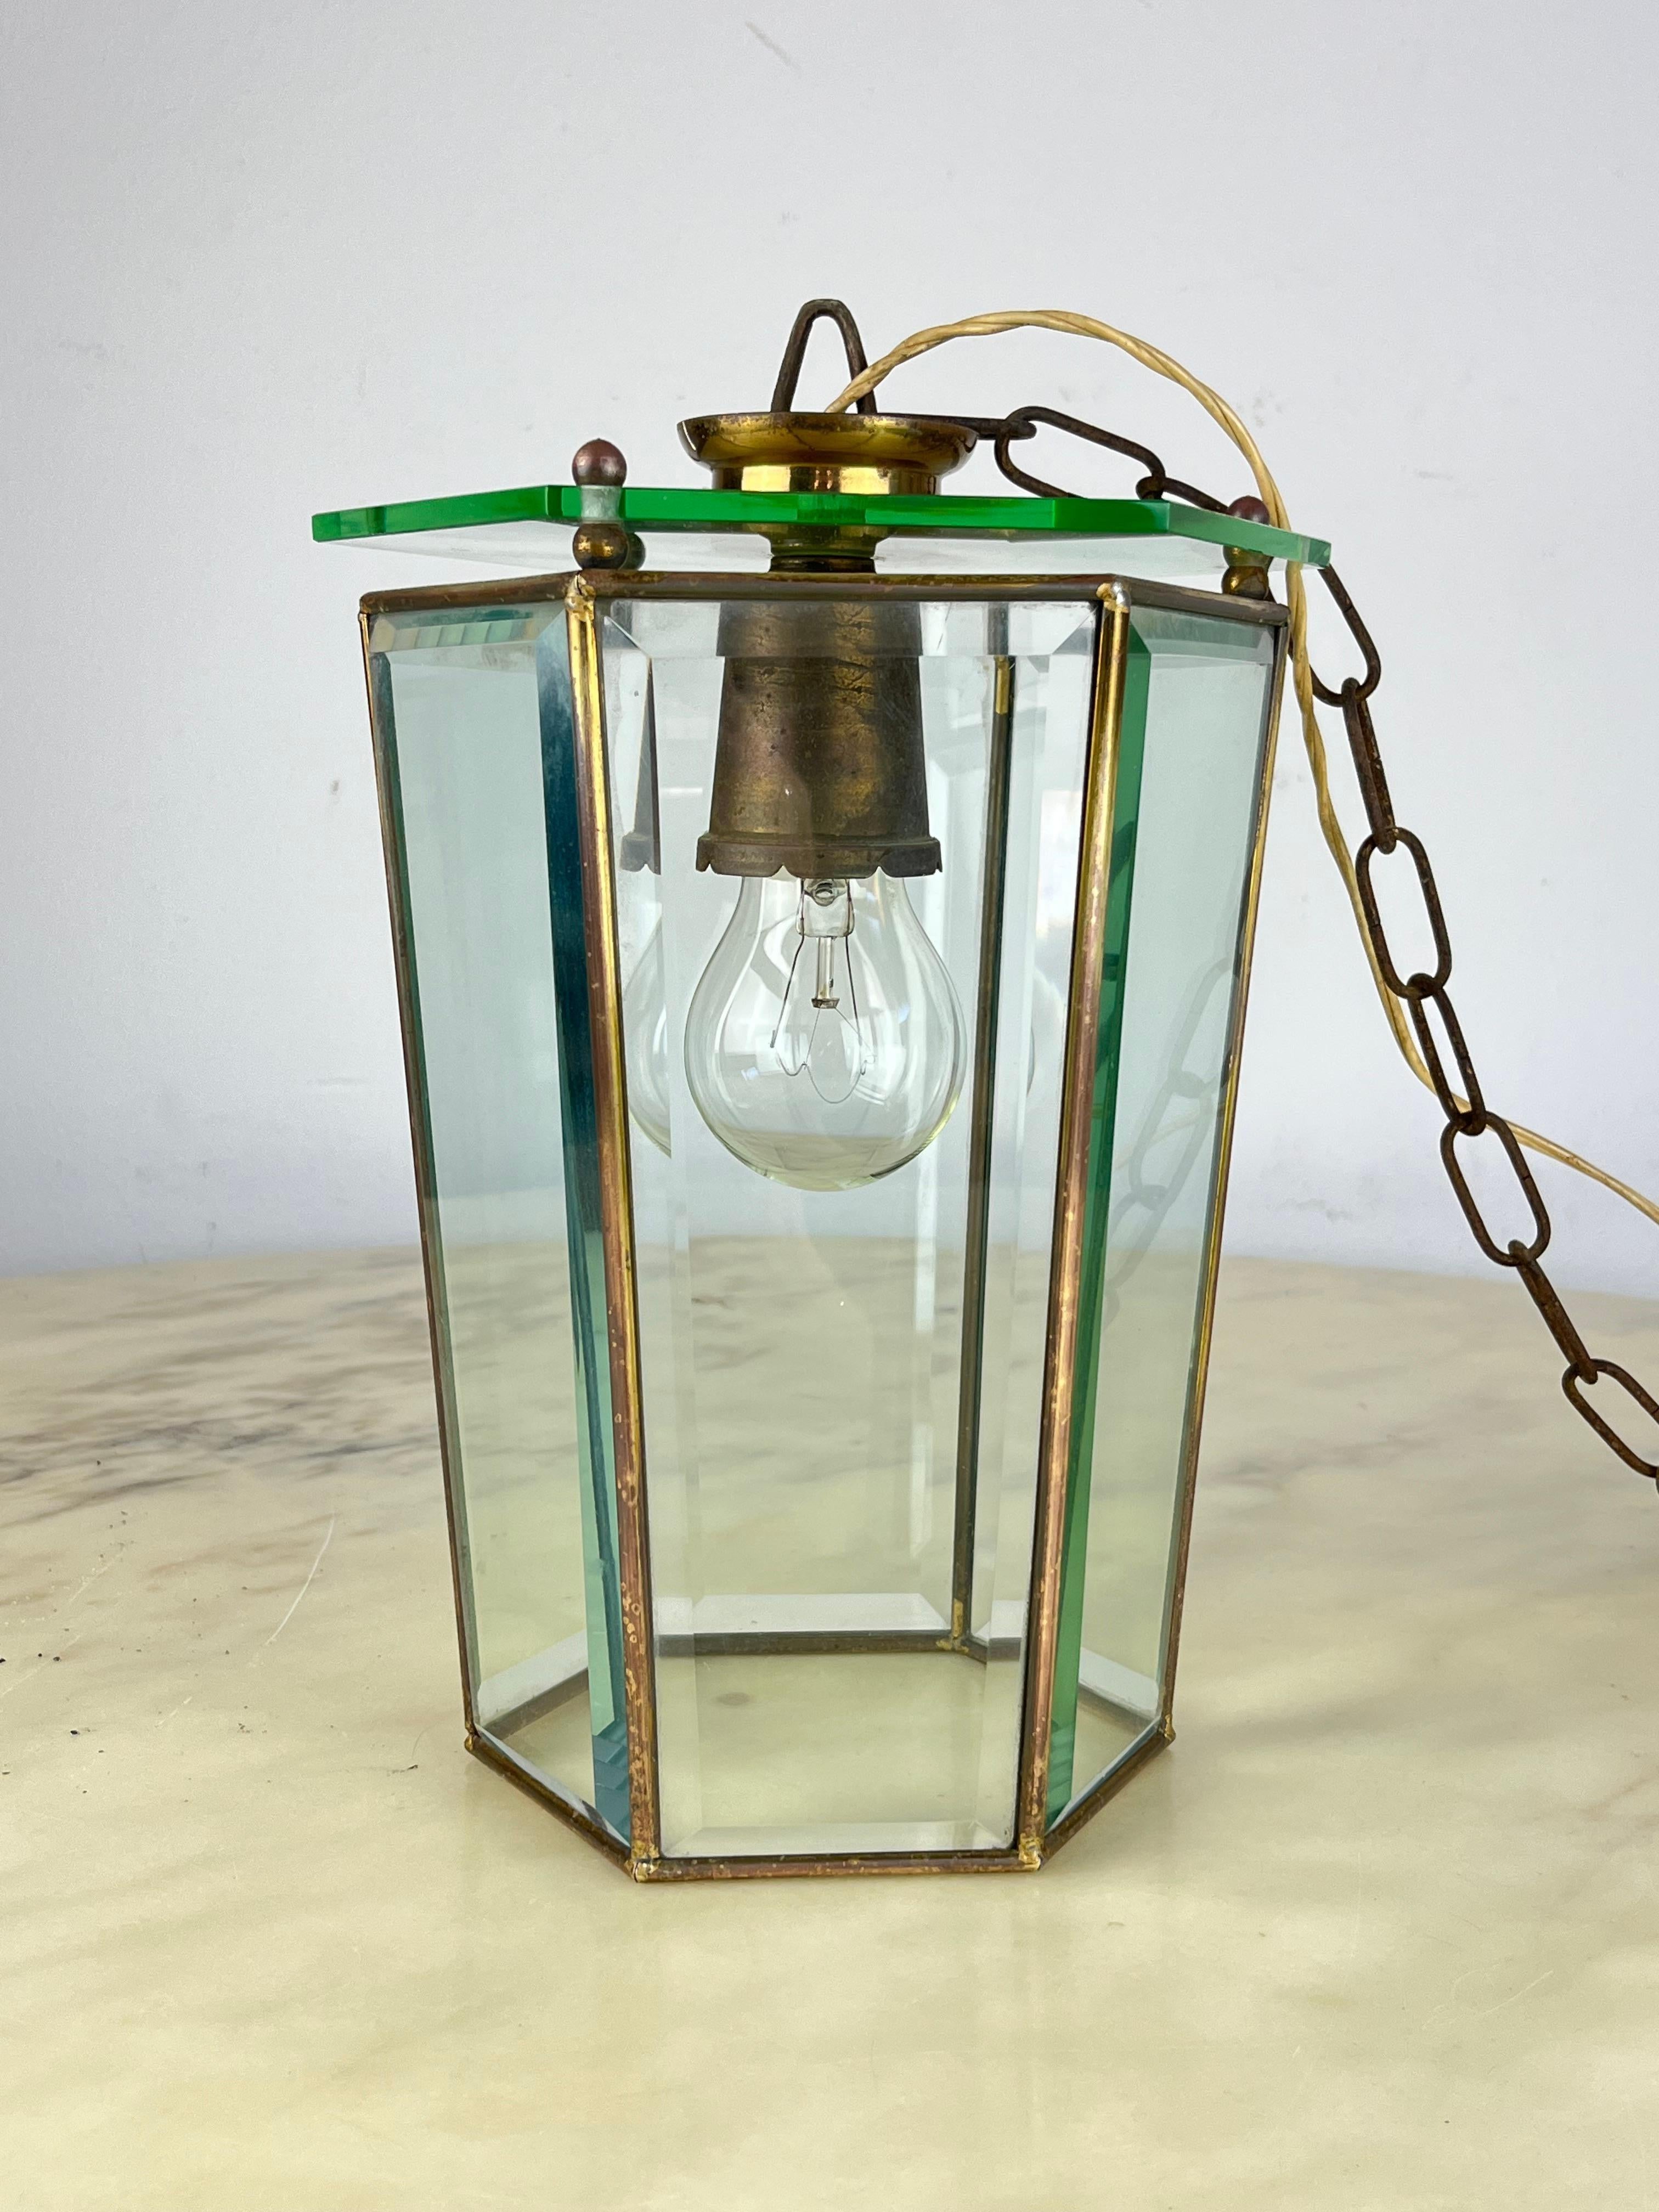 Brass and Cut Glass Pendant Lamp, Attributed to Adolf Loos, Austria, 1930s For Sale 3